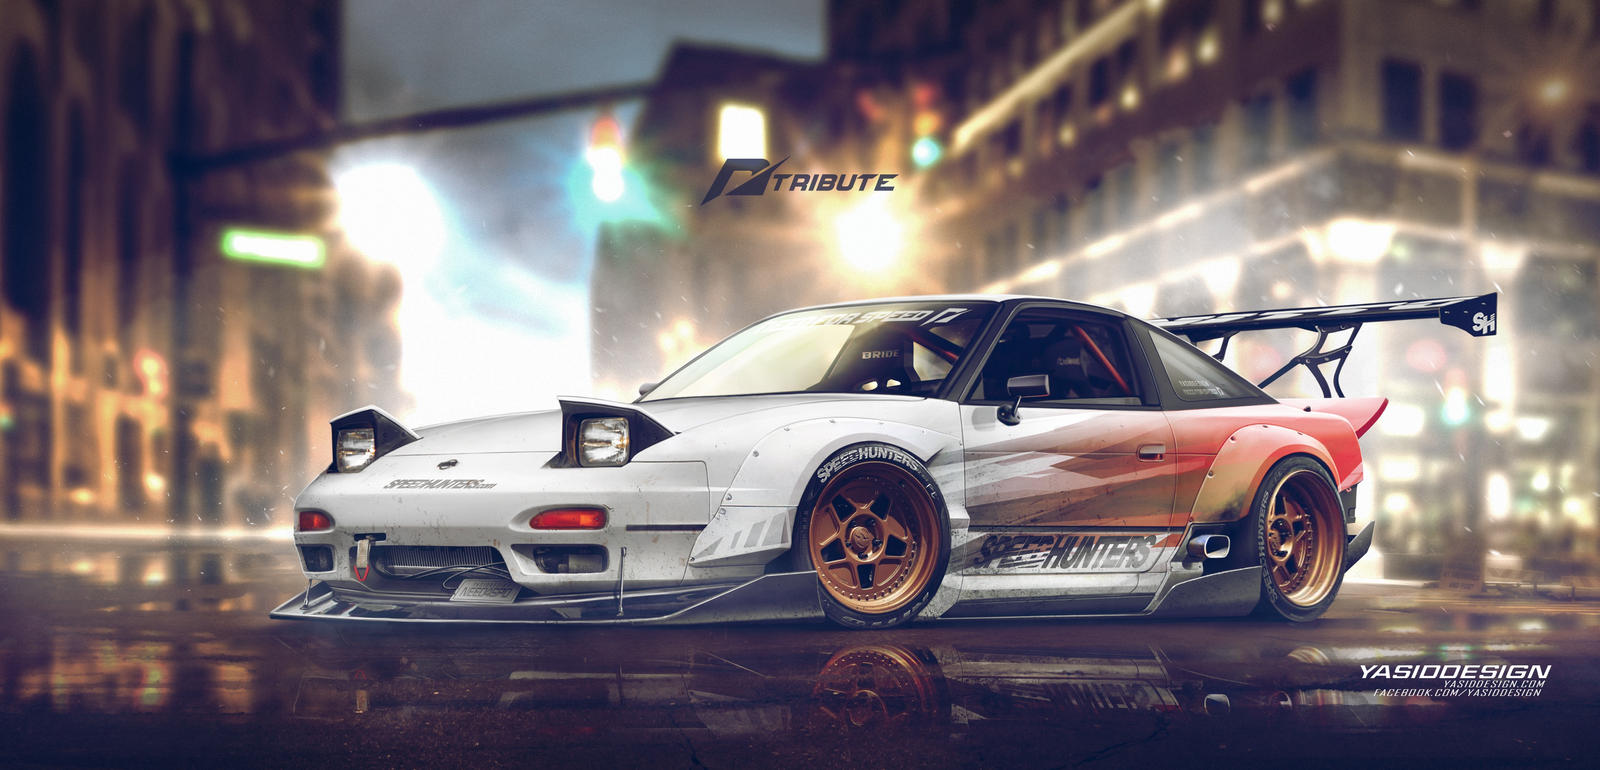 nissan_240sx_nfs_tribute_speedhunters_by